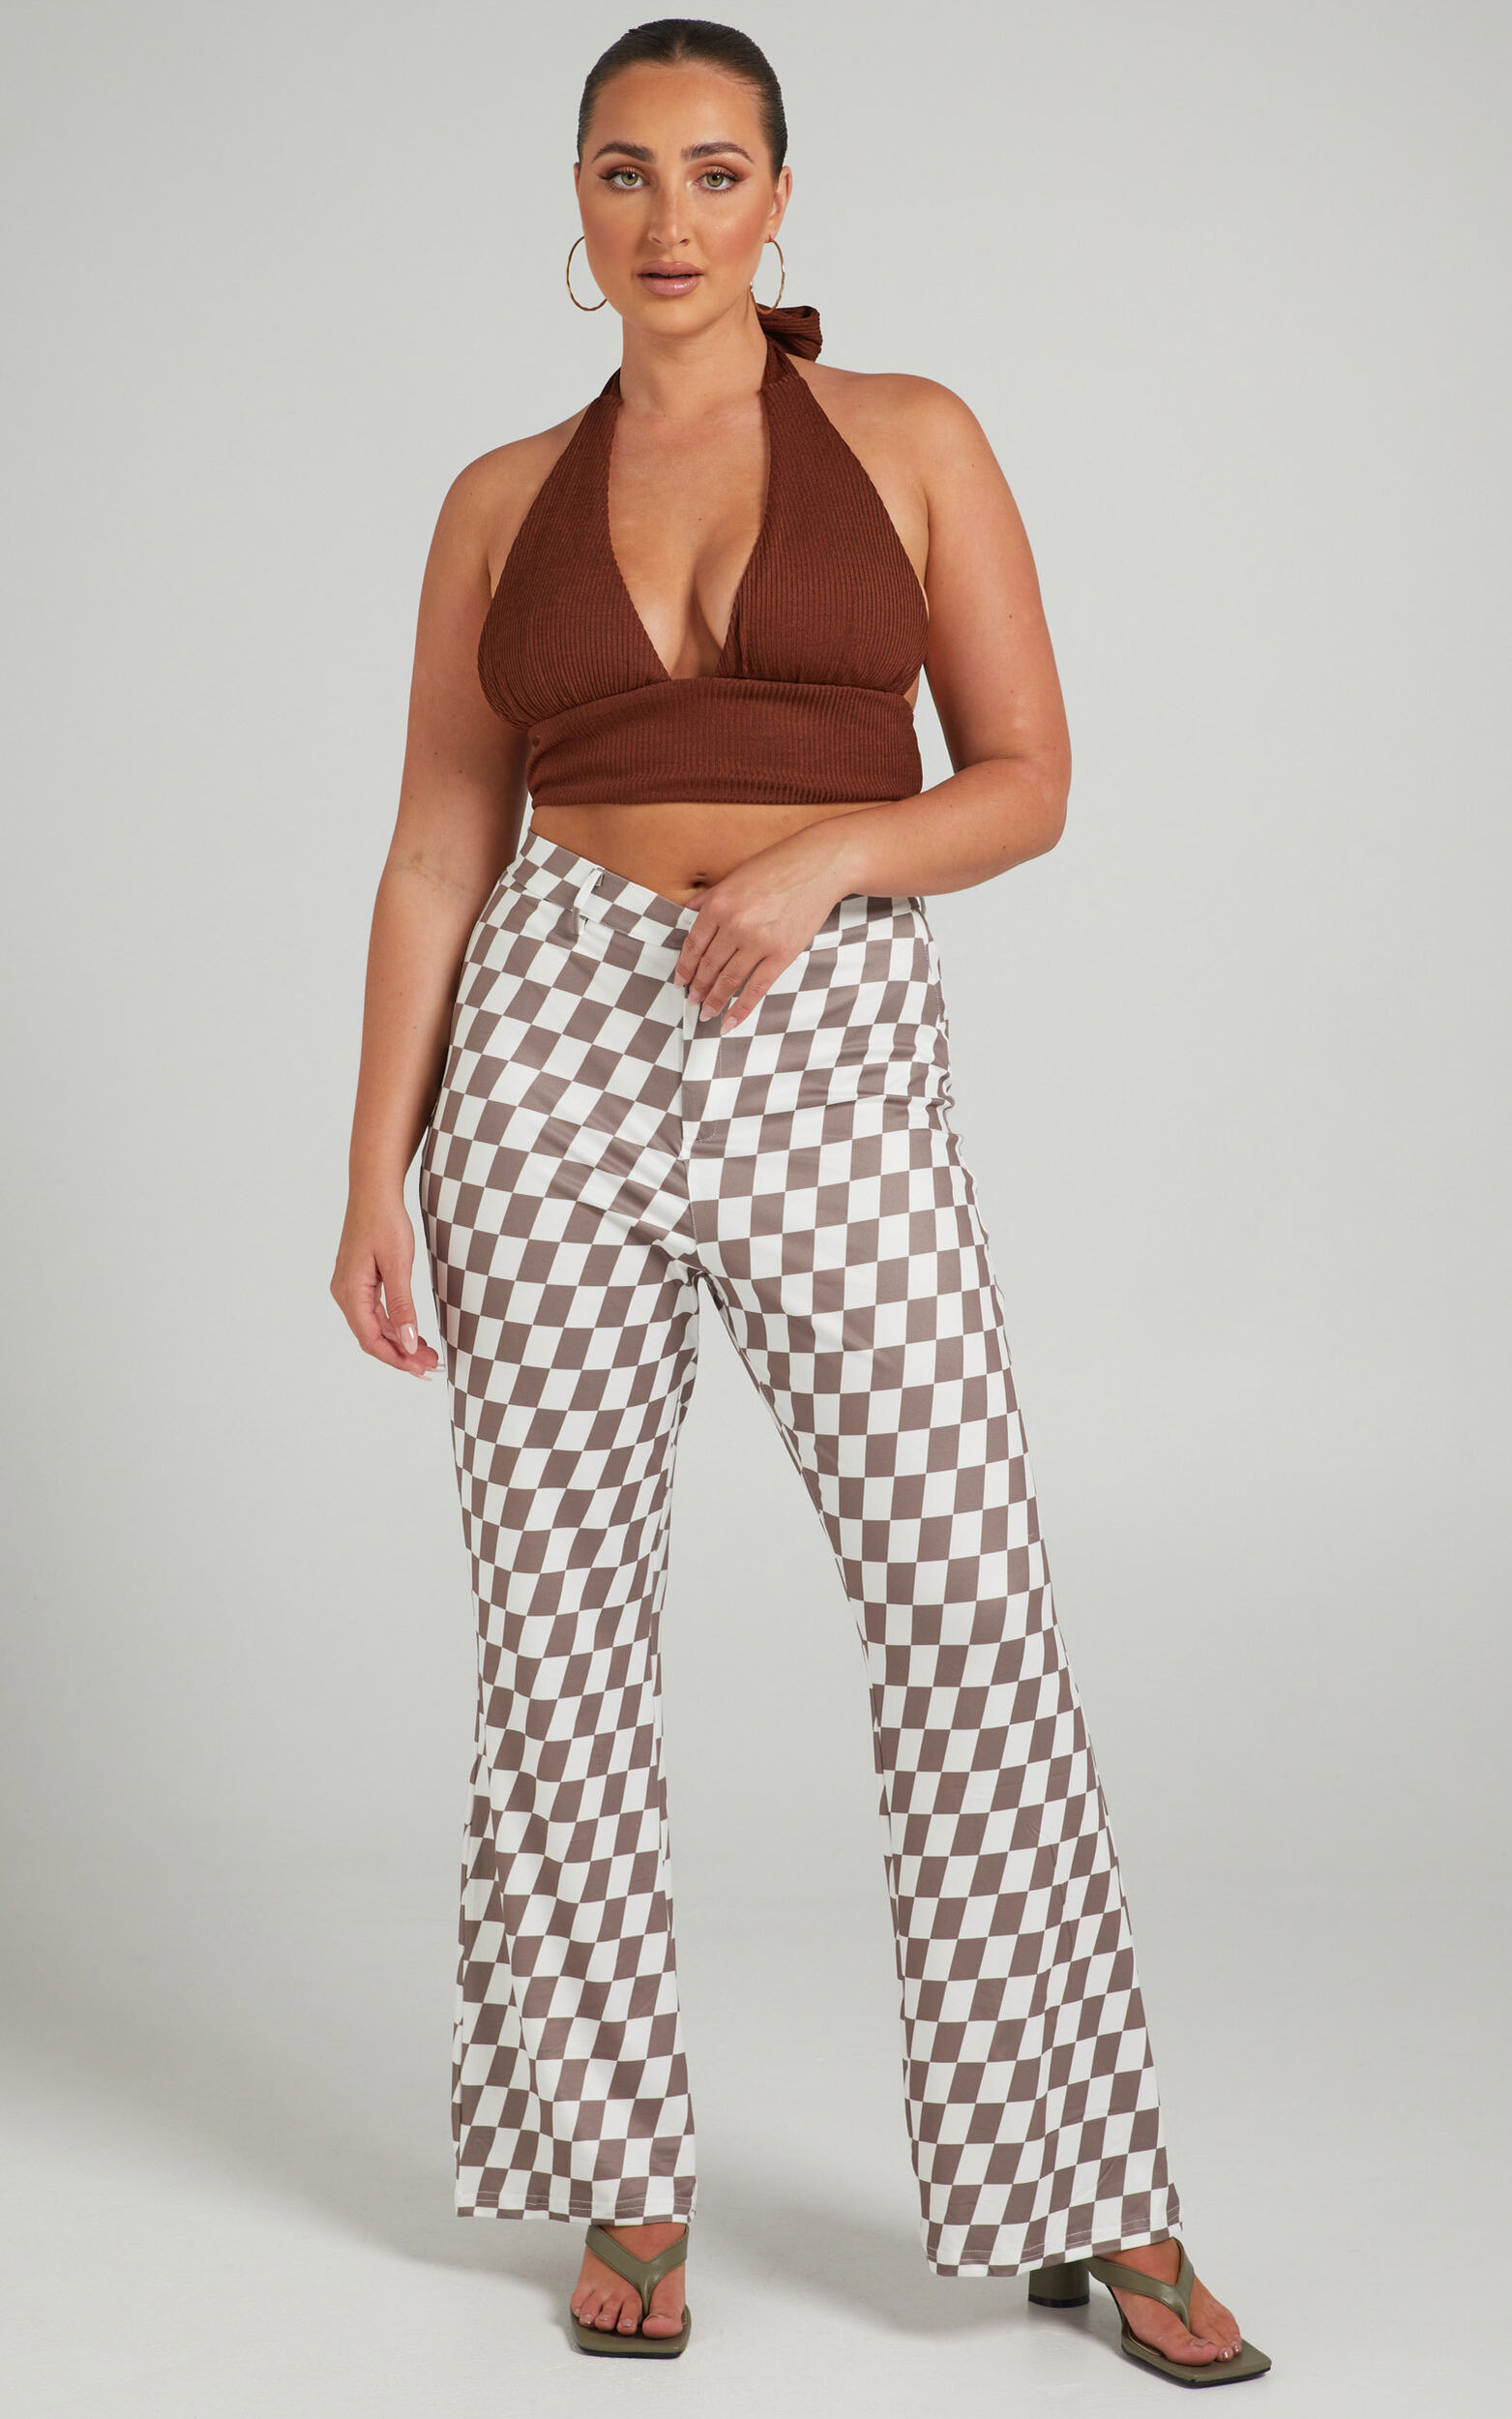 Lenny Pants - Mid Rise Pants in Brown check - 06, BRN1